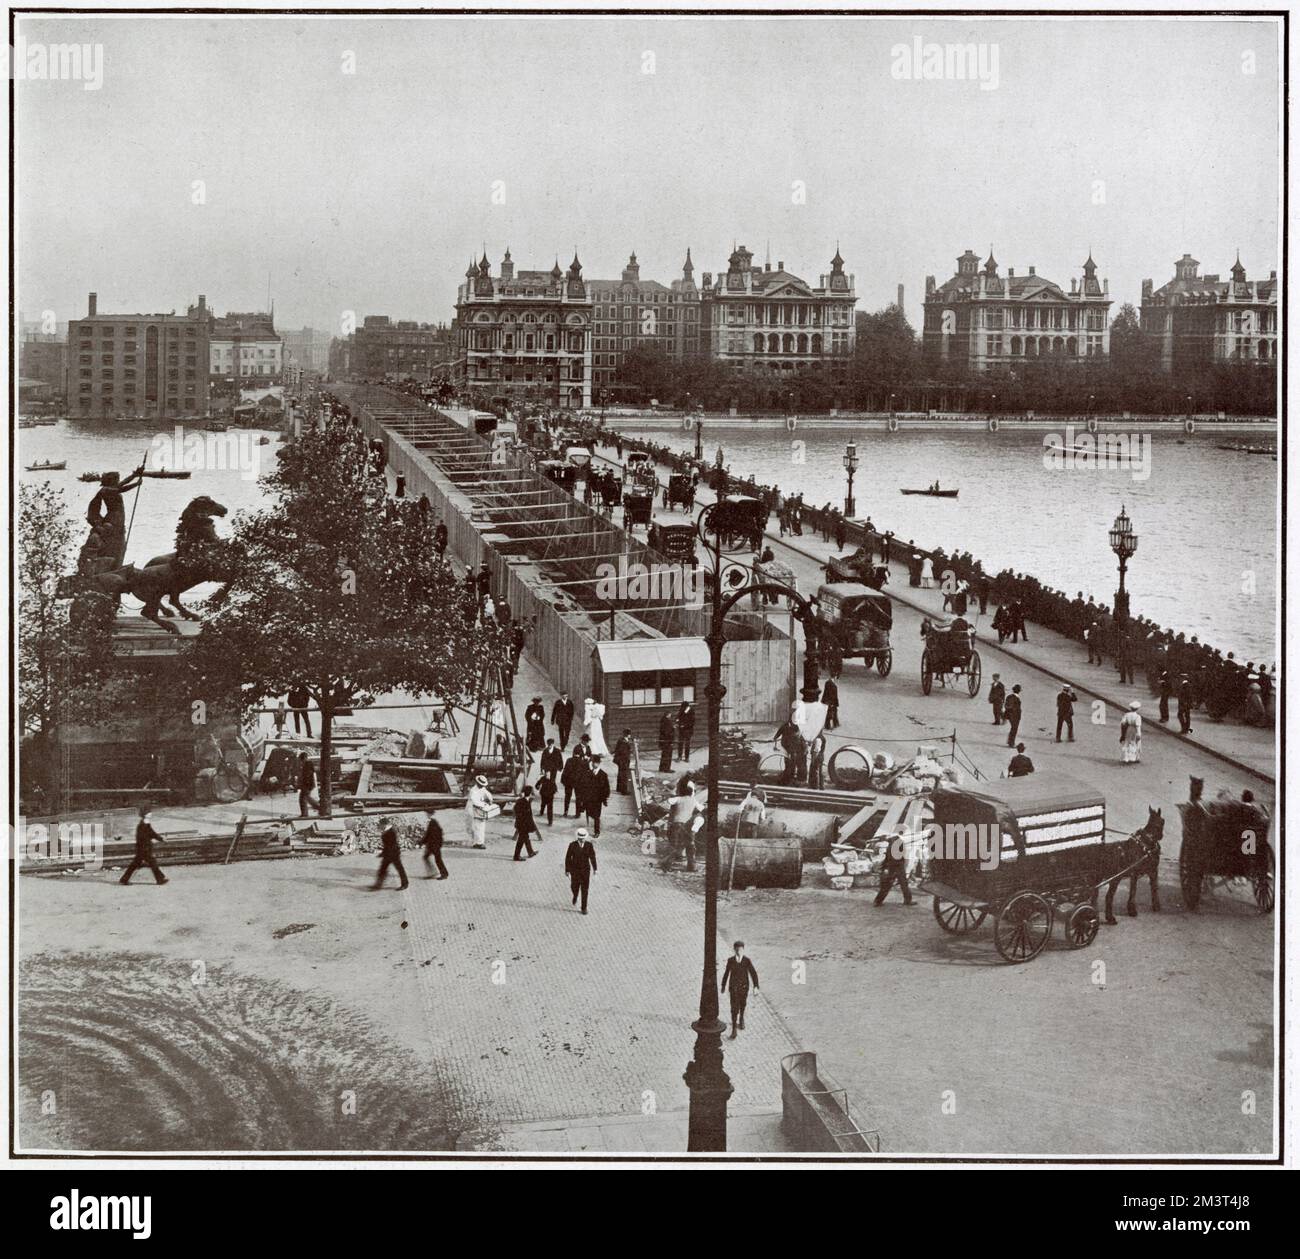 The view of the tramway works, joining north and south of London. The photograph taken from the north shore looking towards St. Thomas Hospital with Boadicea's statue on the left. Stock Photo